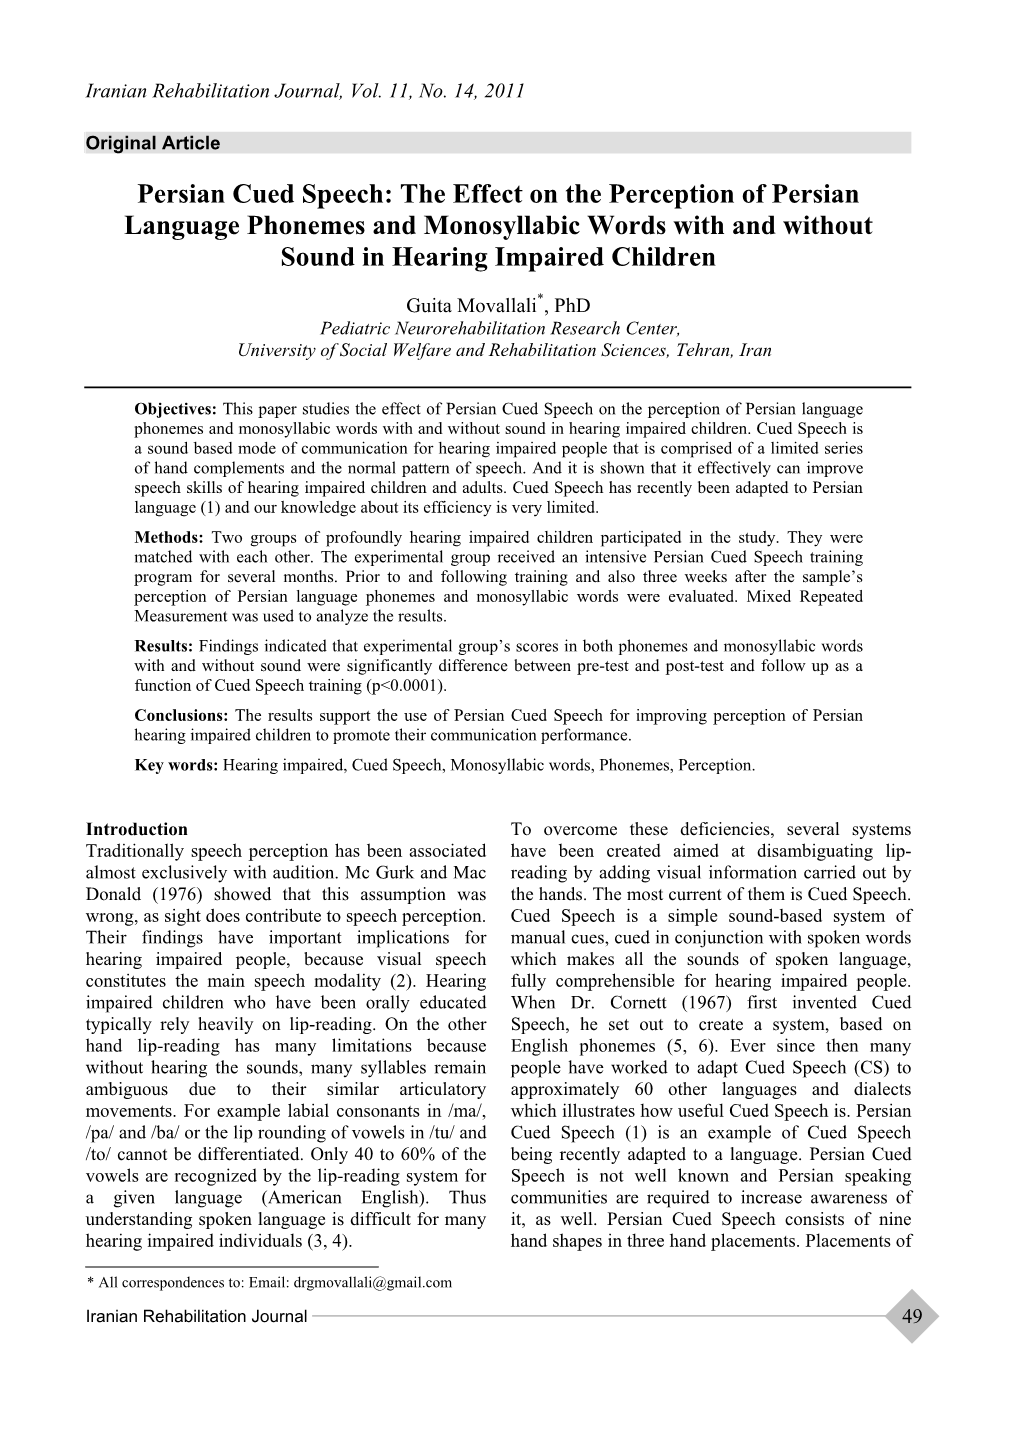 Persian Cued Speech: the Effect on the Perception of Persian Language Phonemes and Monosyllabic Words with and Without Sound in Hearing Impaired Children